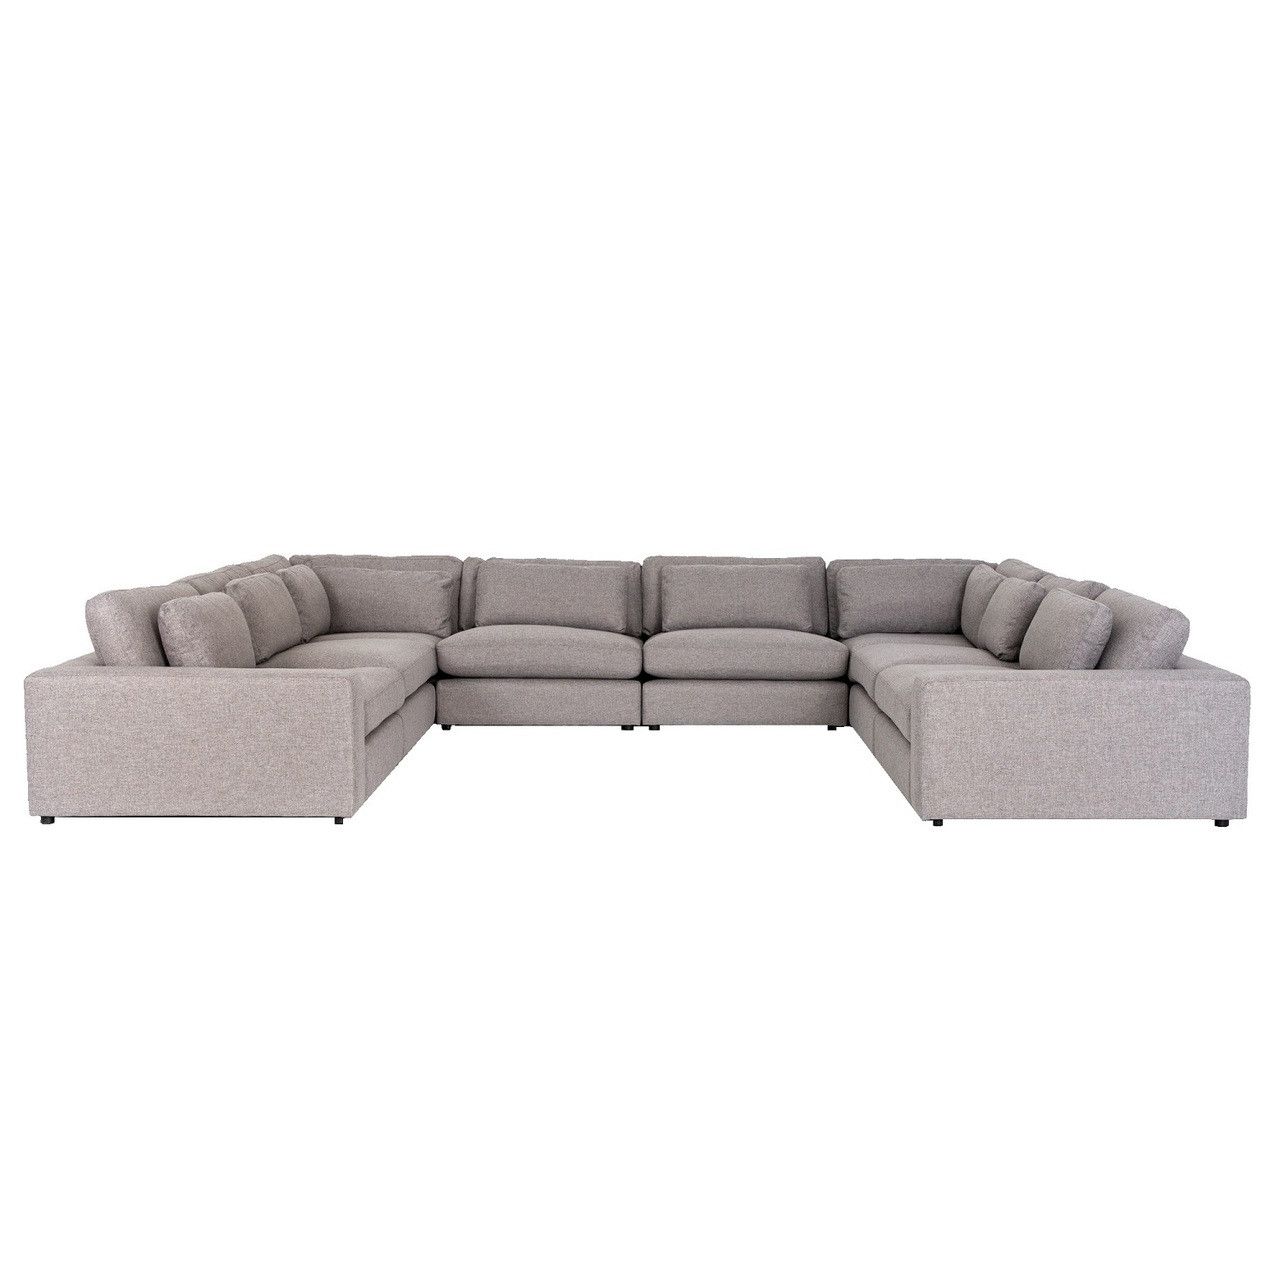 Modern U Shape Sectional Sofas In Gray With Regard To Current Bloor Contemporary Gray Fabric 8 Piece U Shaped Sectional Sofa 170" (View 12 of 15)